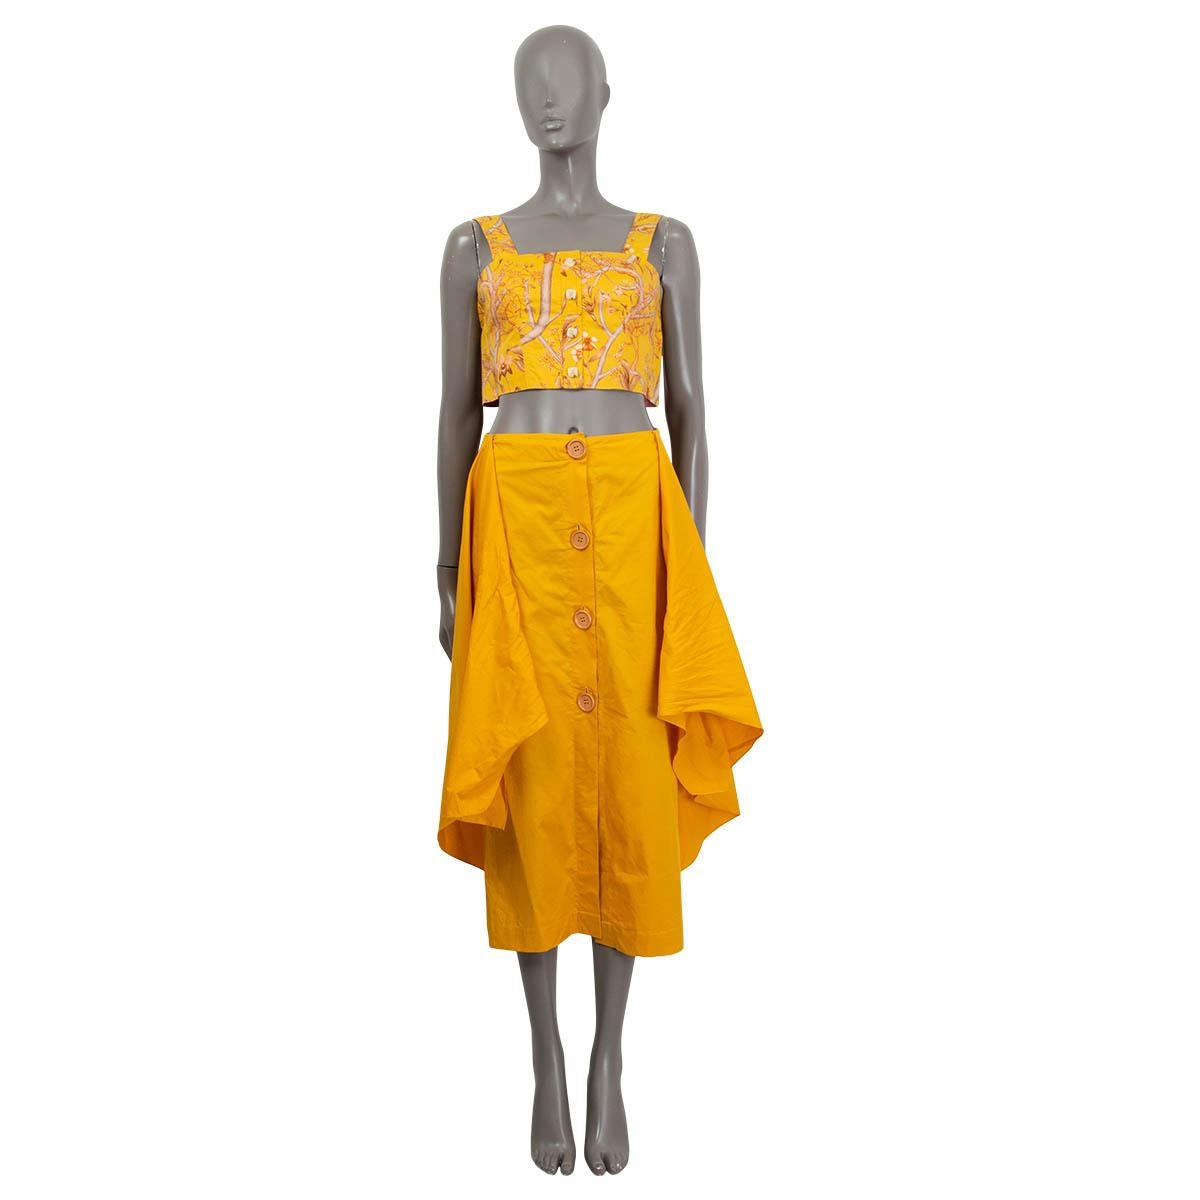 100% authentic Johanna Ortiz 'Romantic Travels' top in curry yellow, salmon and nude cotton (100%). Features four faux buttons on the front and a bow at the back. Opens with two hooks on the back. Unlined. Has been worn and is in excellent